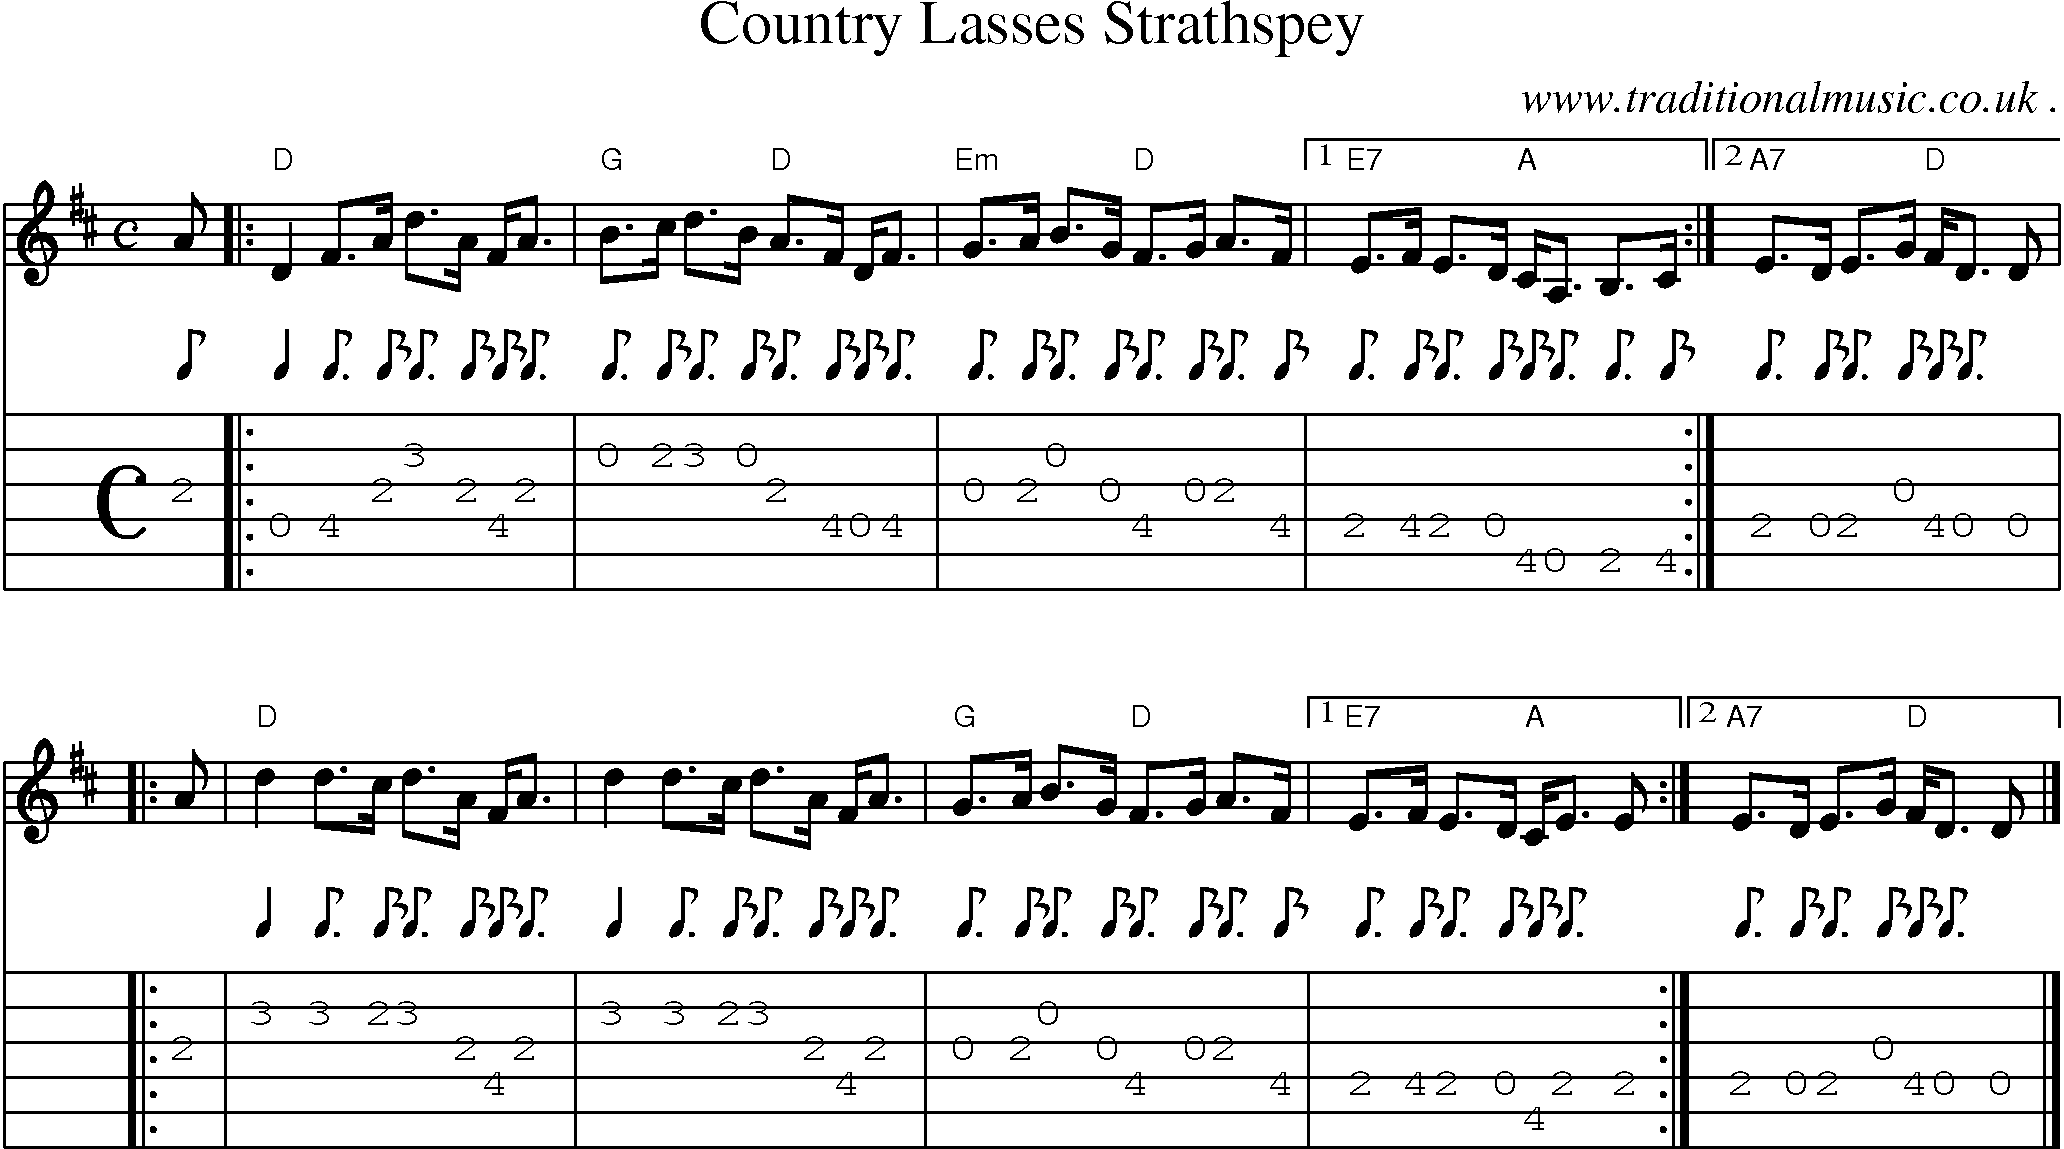 Sheet-music  score, Chords and Guitar Tabs for Country Lasses Strathspey